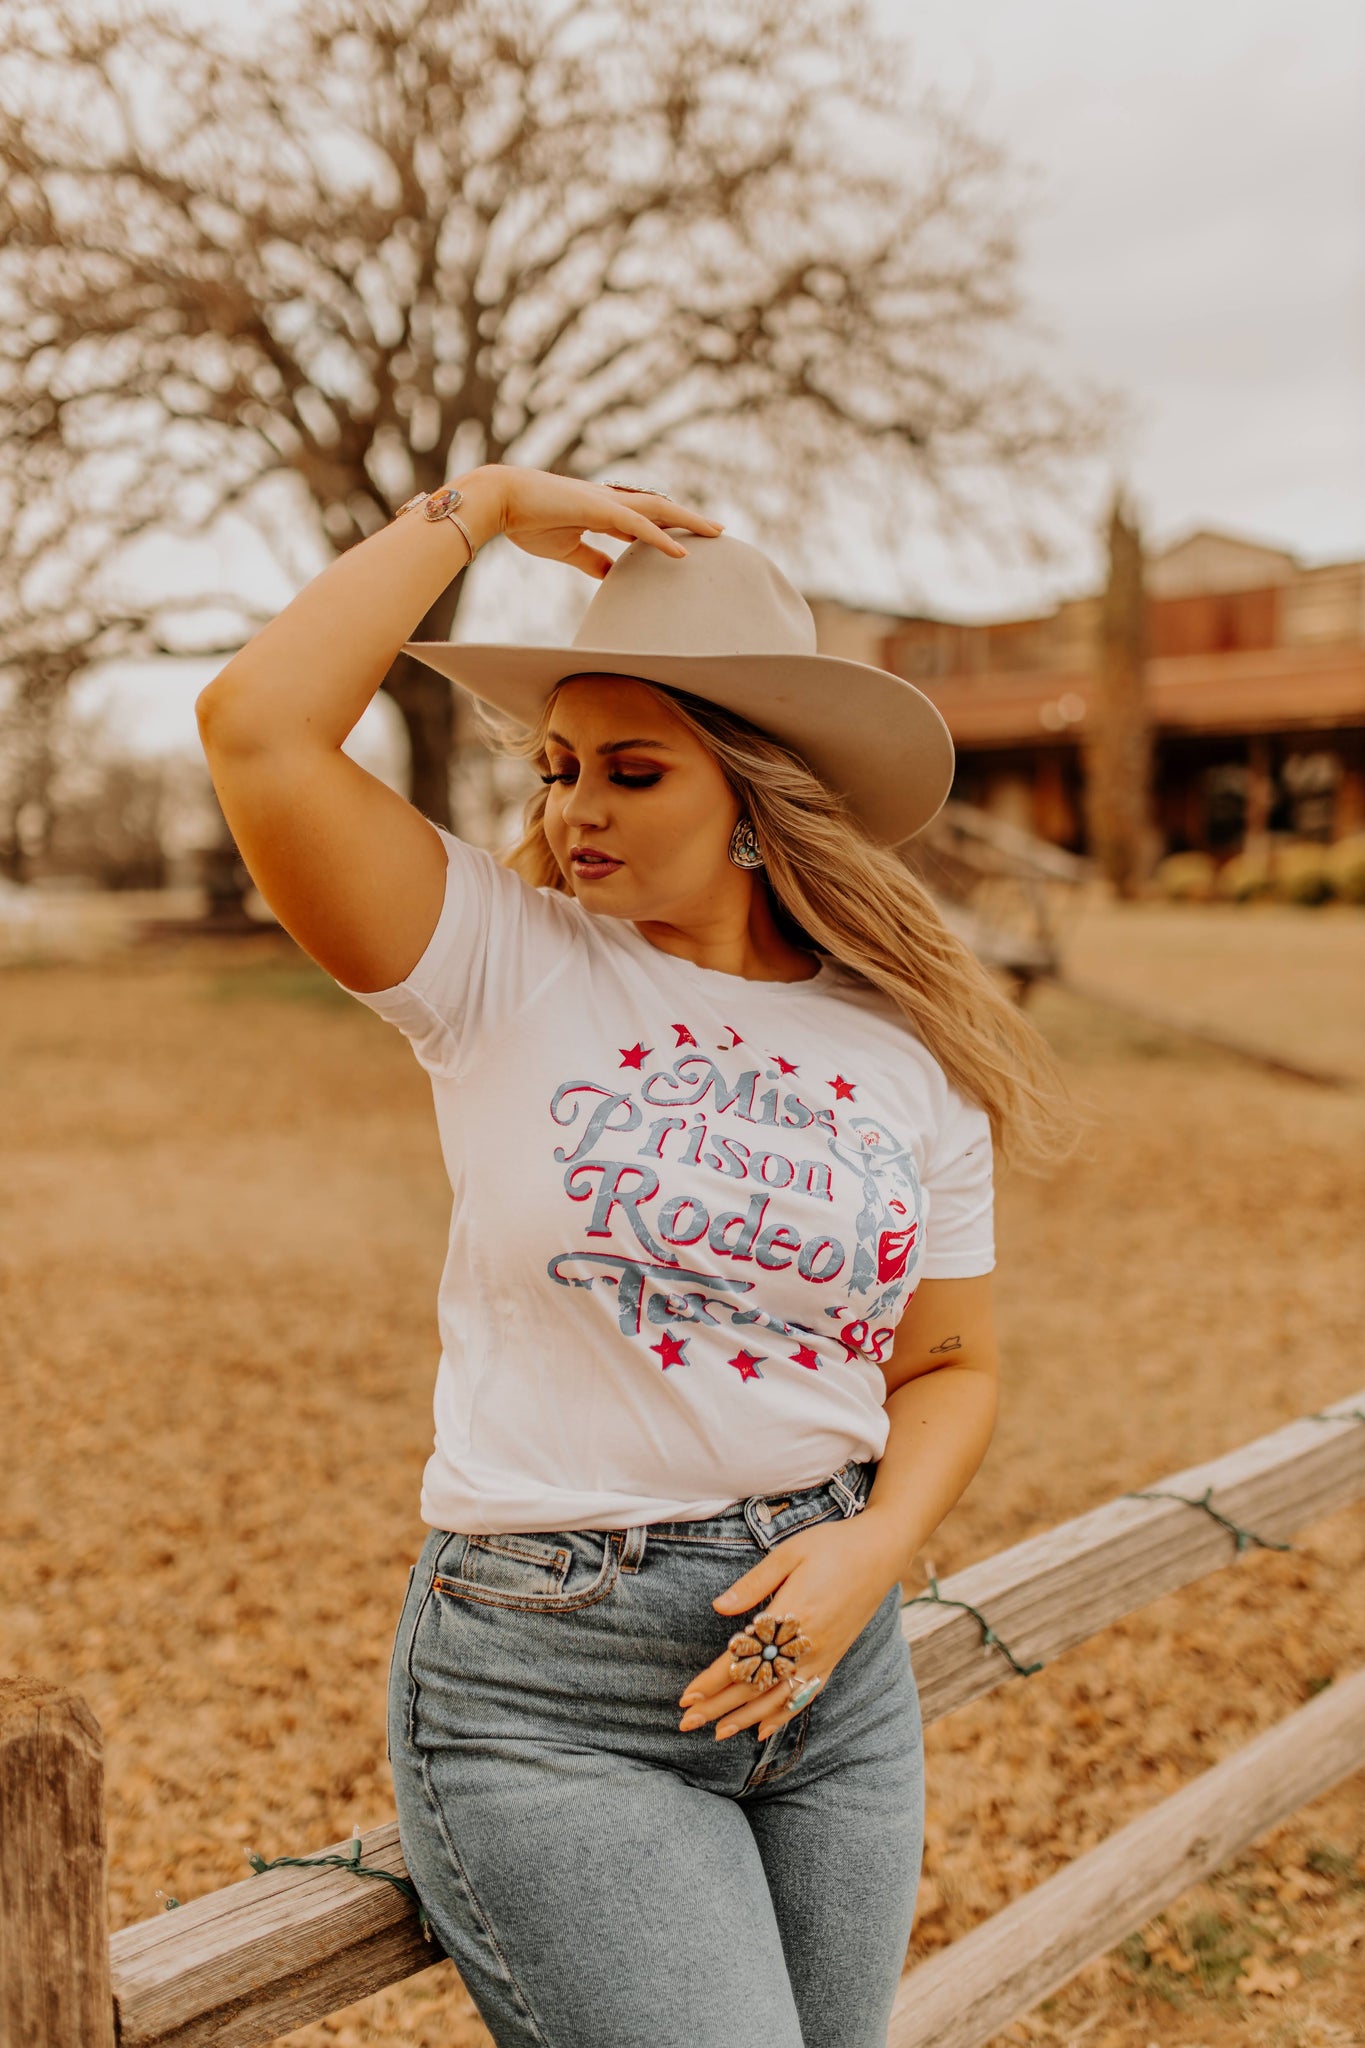 Distressed Miss Prison Rodeo Graphic Tee